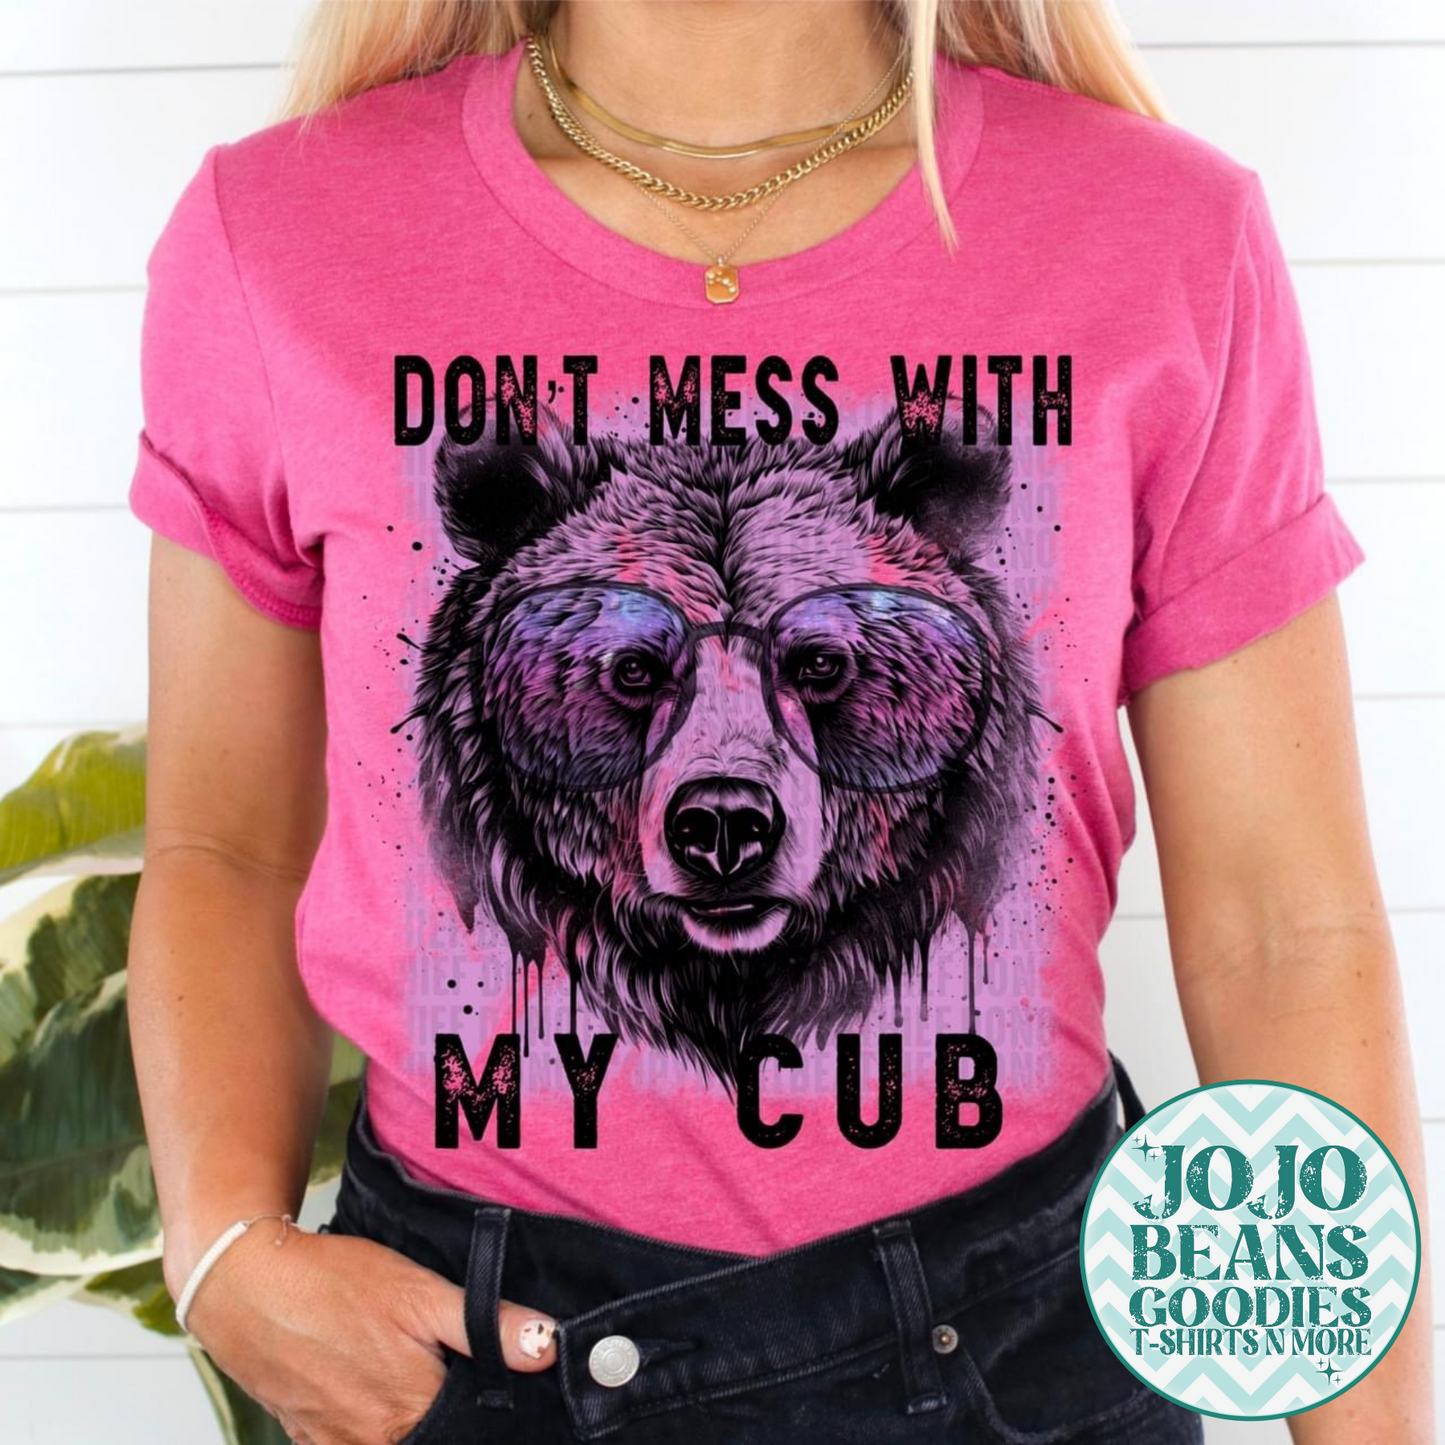 Don't Mess With My Cub(s)